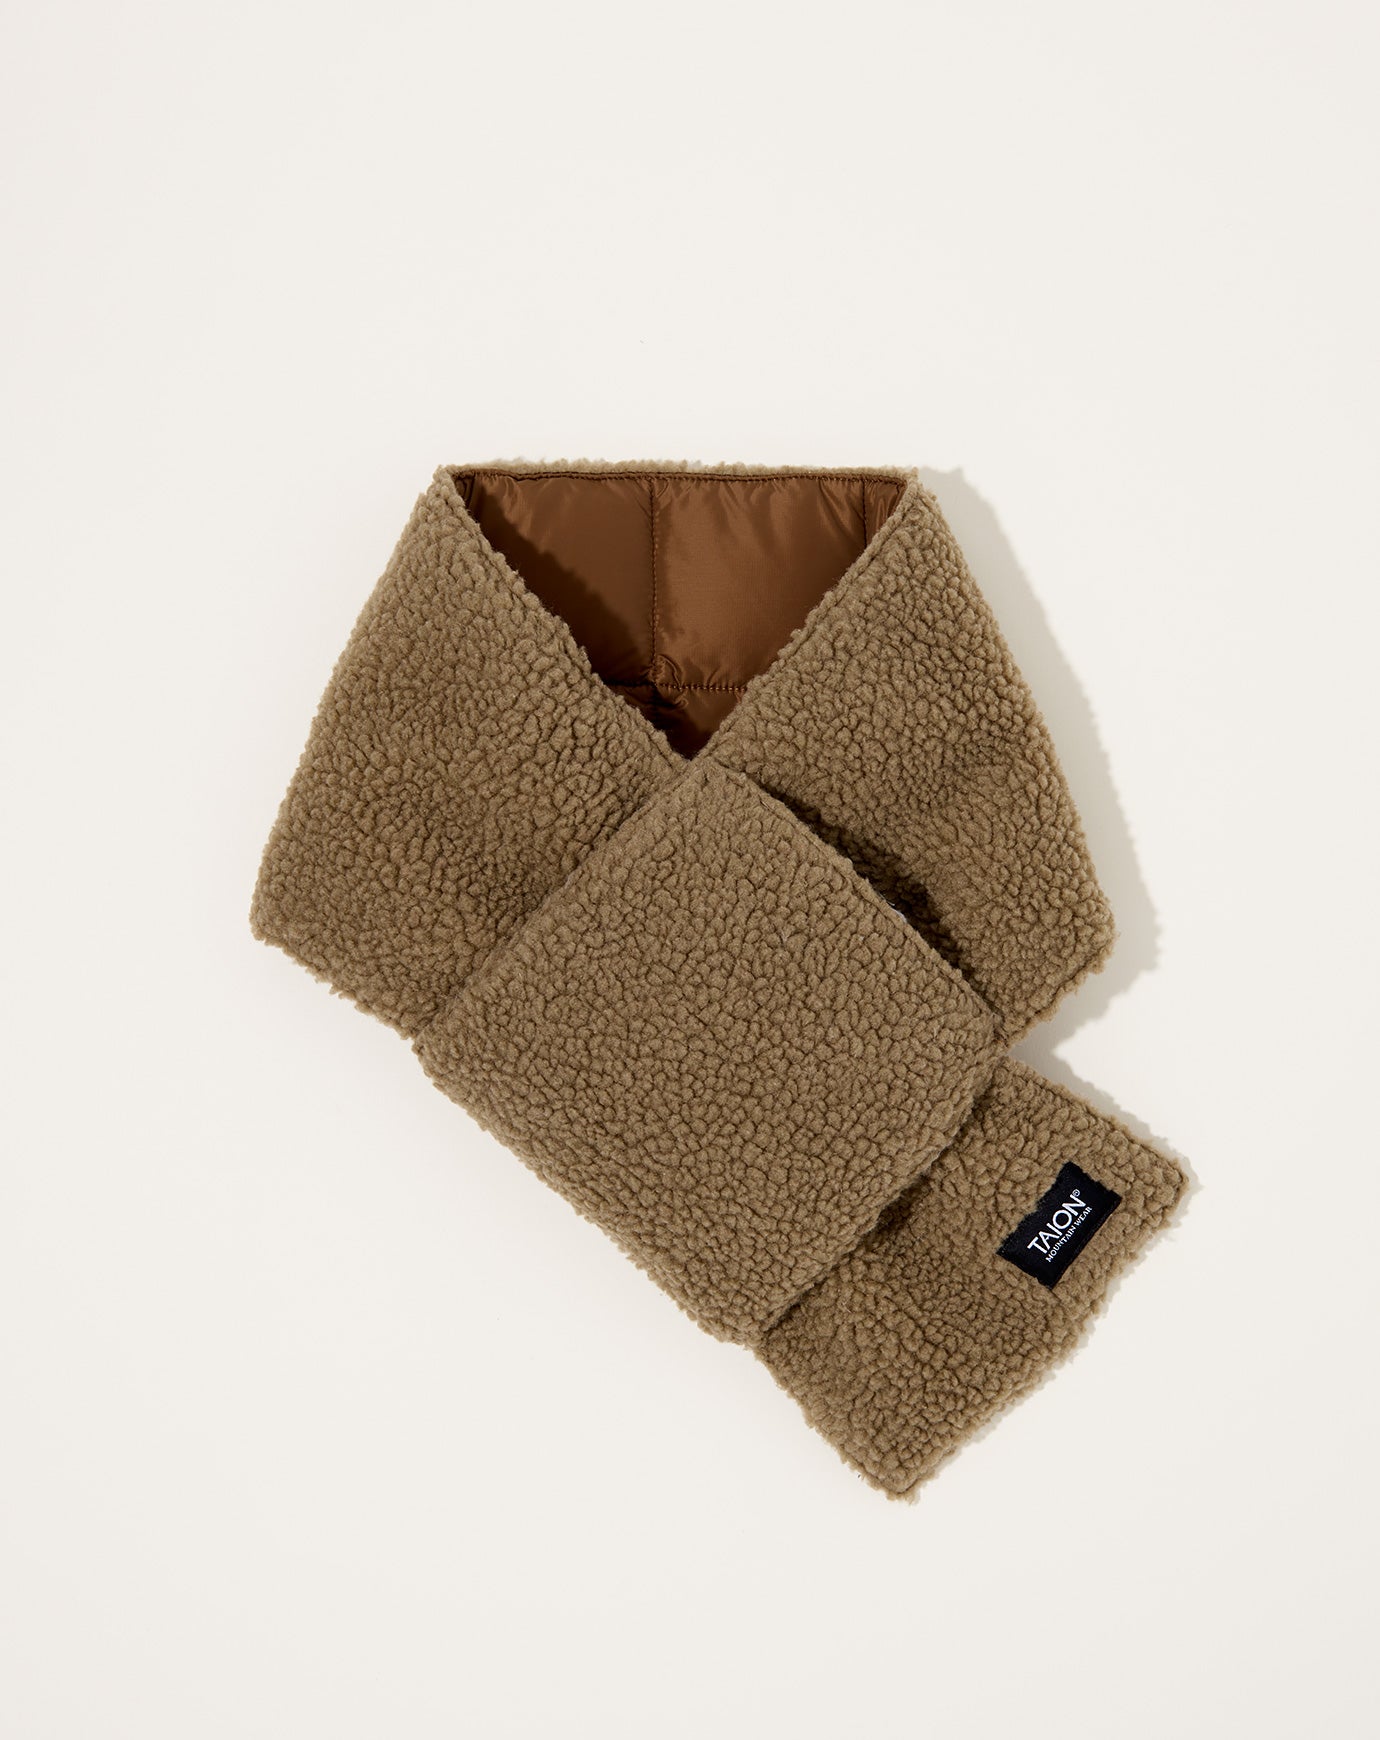 Taion Reversible Mountain Down X BOA Scarf in Light Brown & Beige